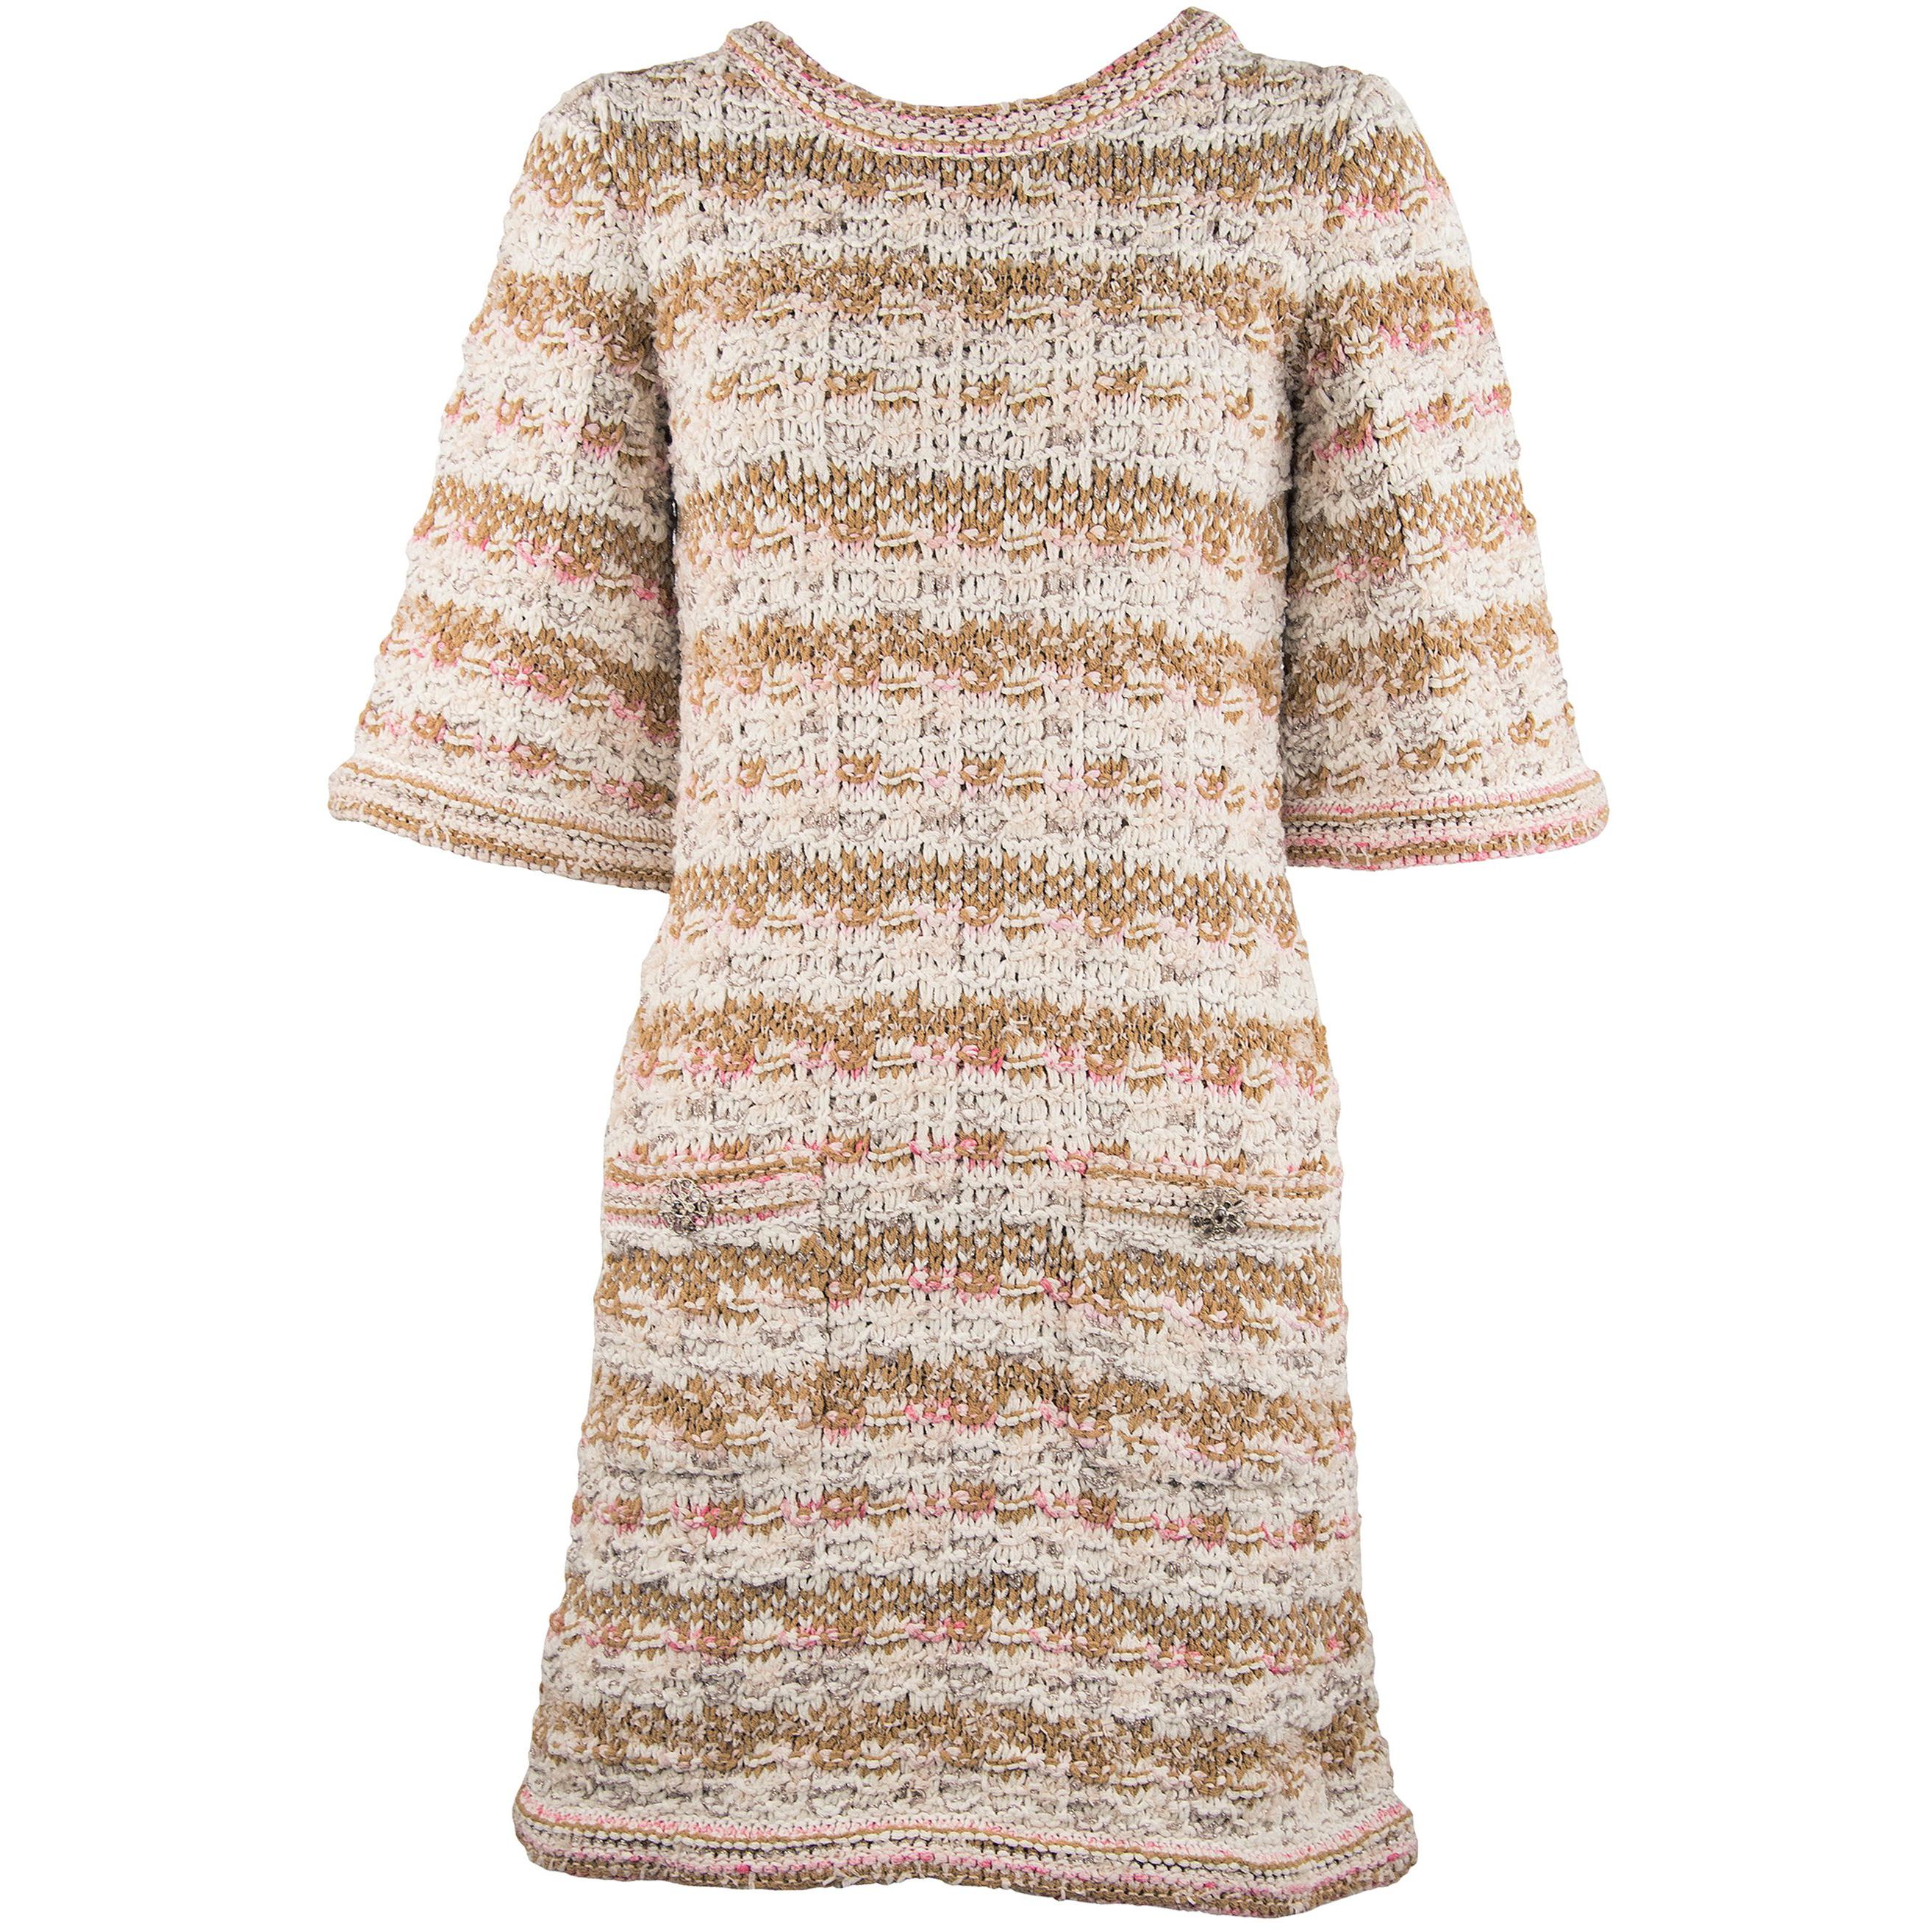 Chanel Resort 2015 Multicolored Woven Shift Dress - Size FR 36 For Sale